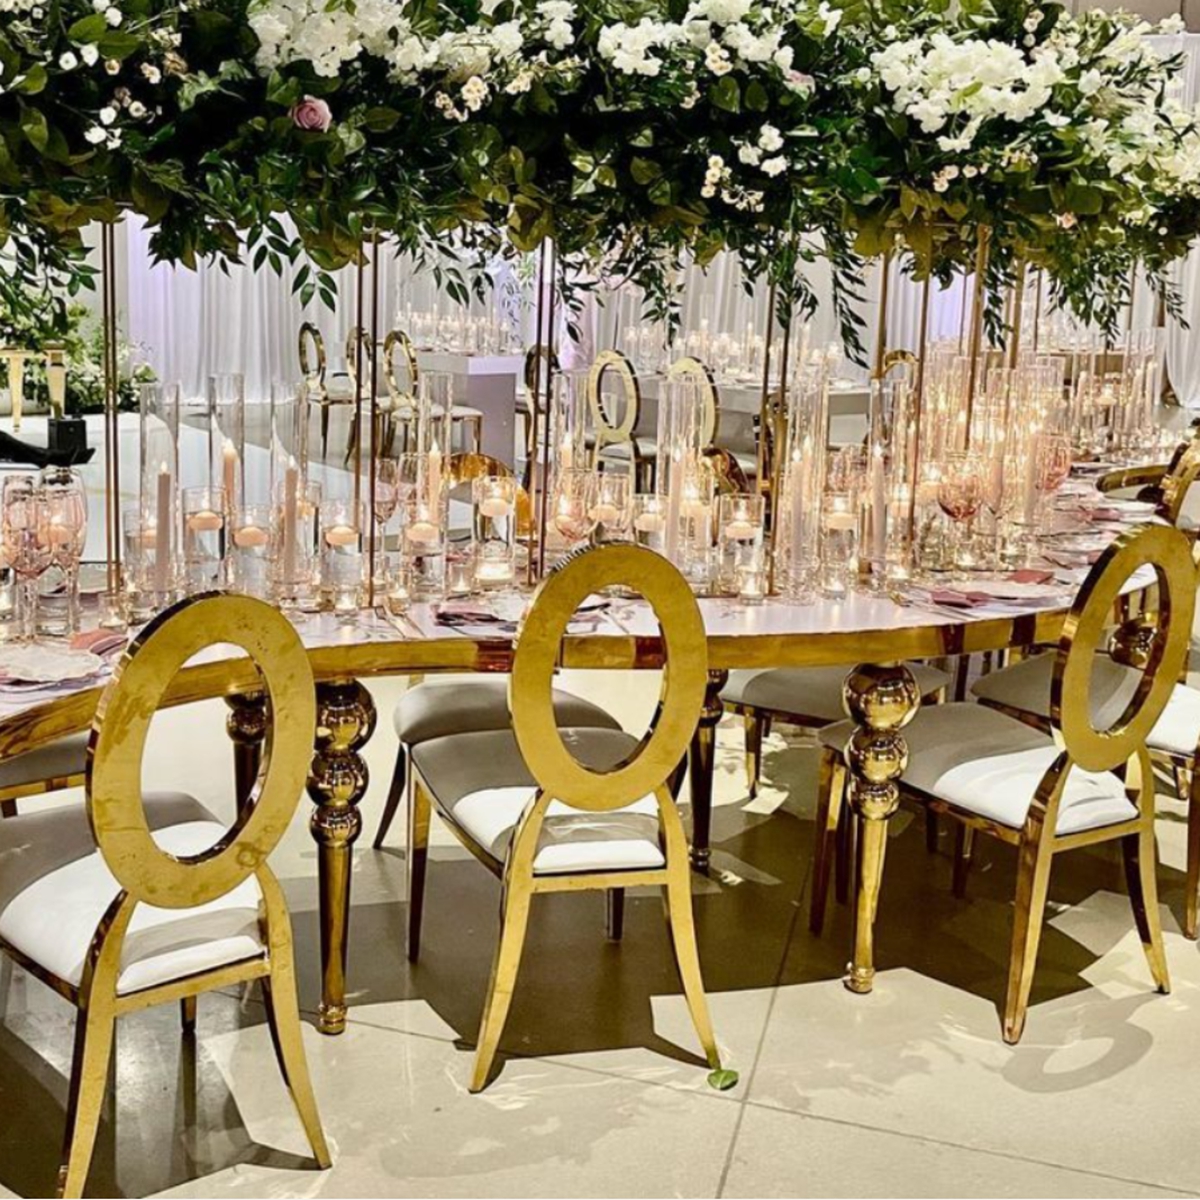 Whole sale Ring Wedding Chair golden Stainless Steel Chairs for wedding ceremony outdoor party use